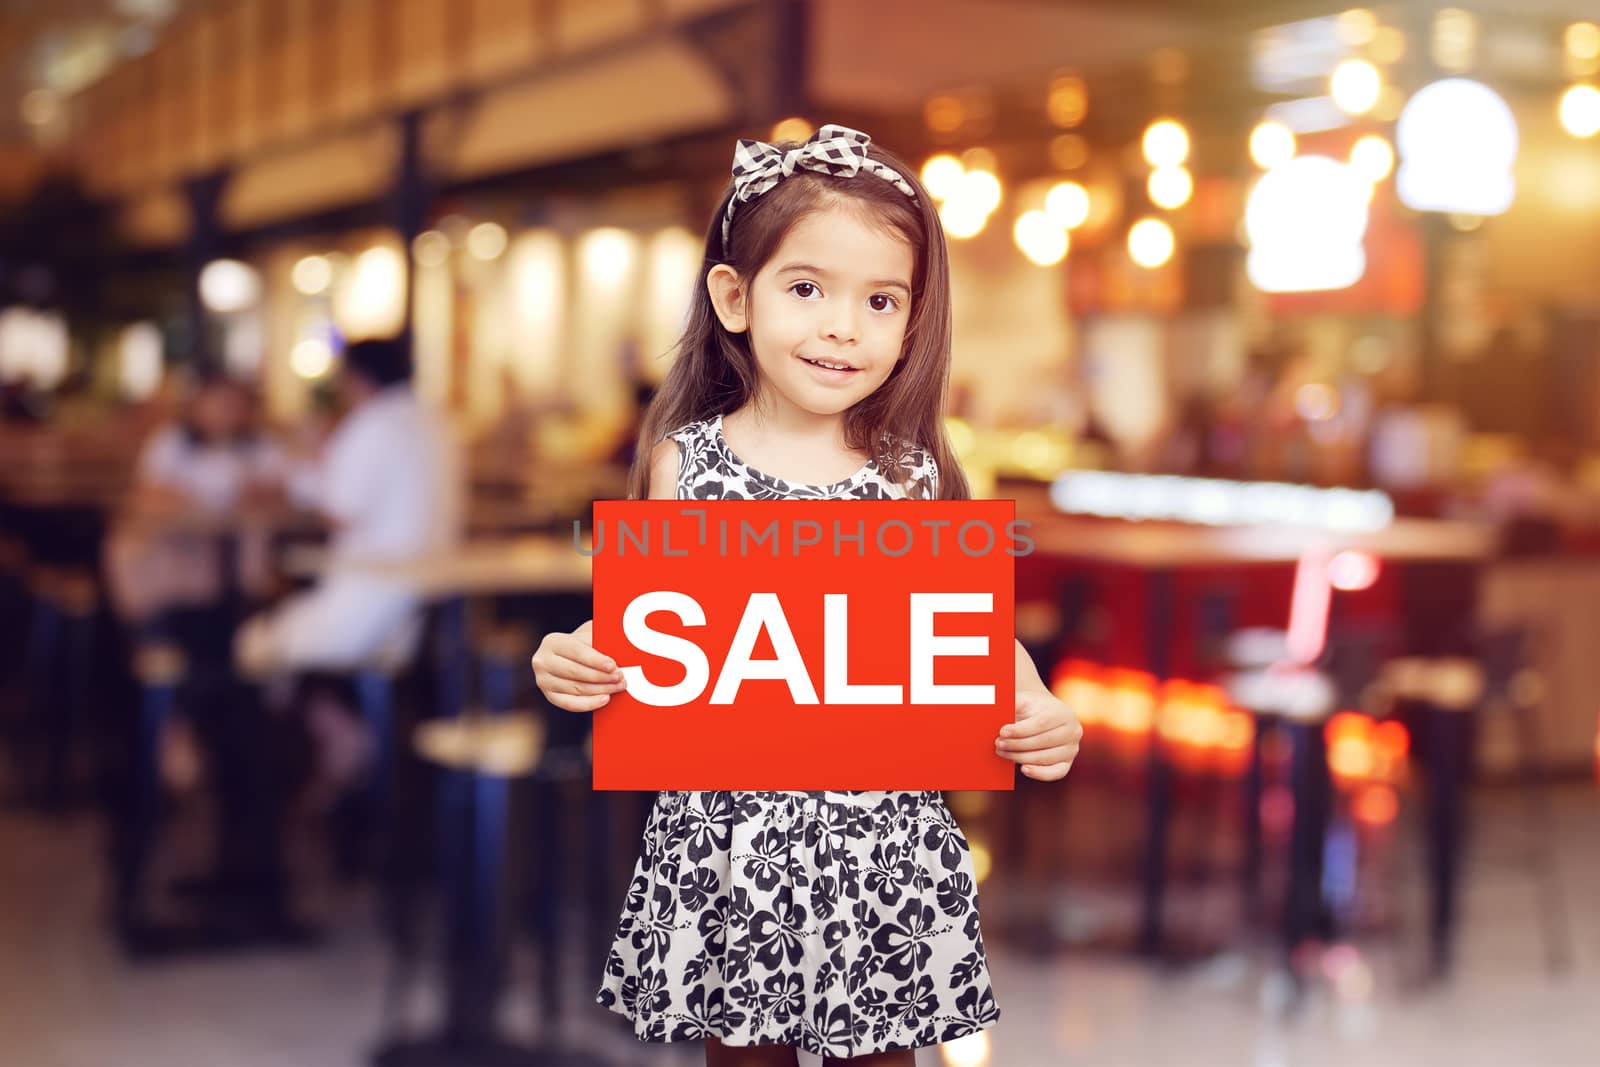 sale discount promotion for shop concept : adorable girl holding red sign with text sale in white color in front of shop , restaurant or cafe by asiandelight